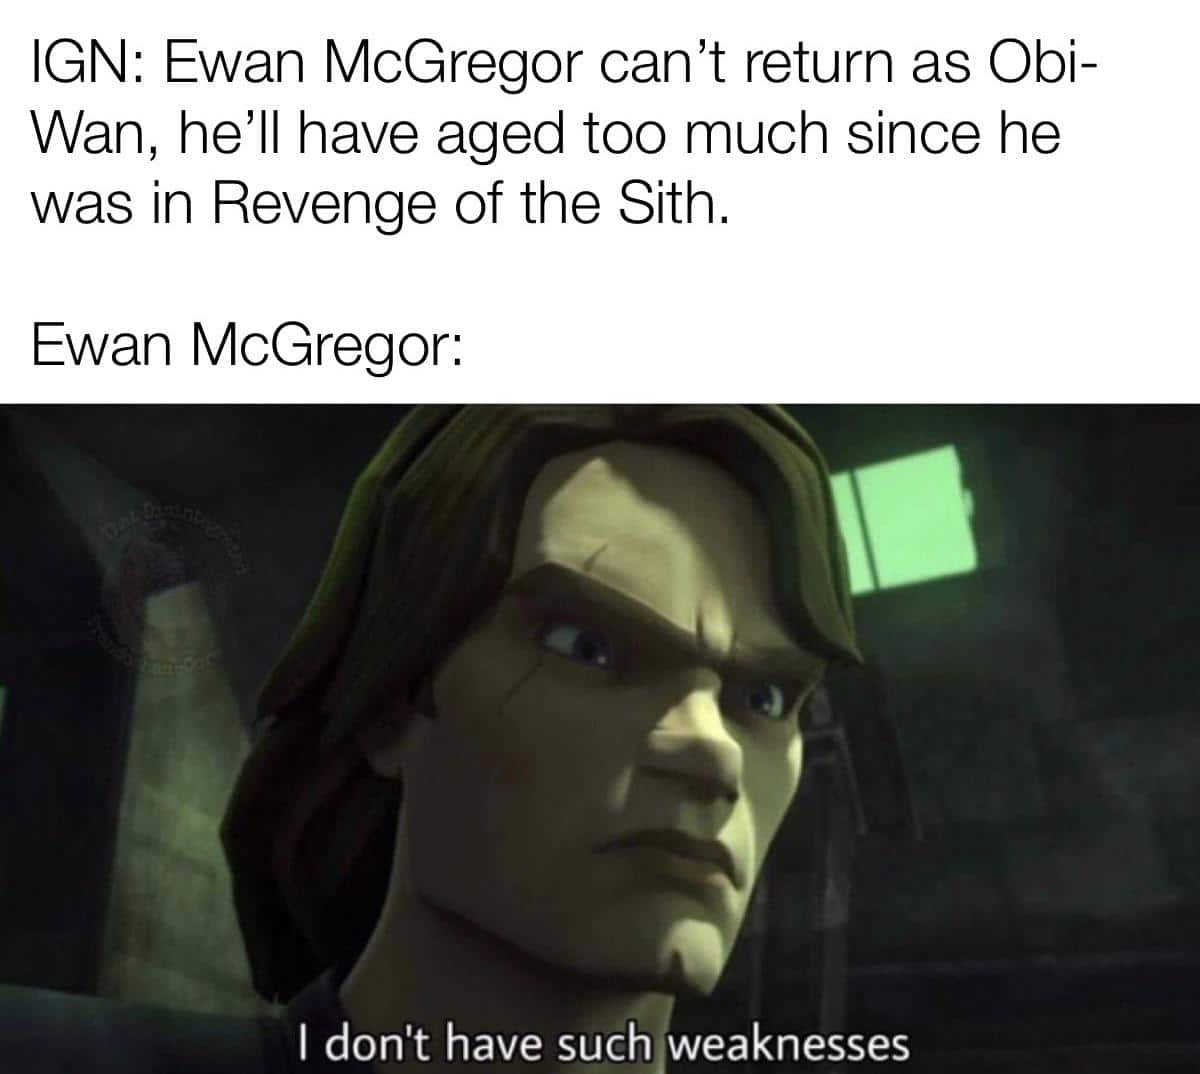 Prequel-memes, IGN, Ewan, Obi-Wan, ROTS, Obi Wan Star Wars Memes Prequel-memes, IGN, Ewan, Obi-Wan, ROTS, Obi Wan text: IGN: Ewan McGregor can't return as Obi- Wan, he'll have aged too much since he was in Revenge of the Sith. Ewan McGregor: I don't have such weaknesses 